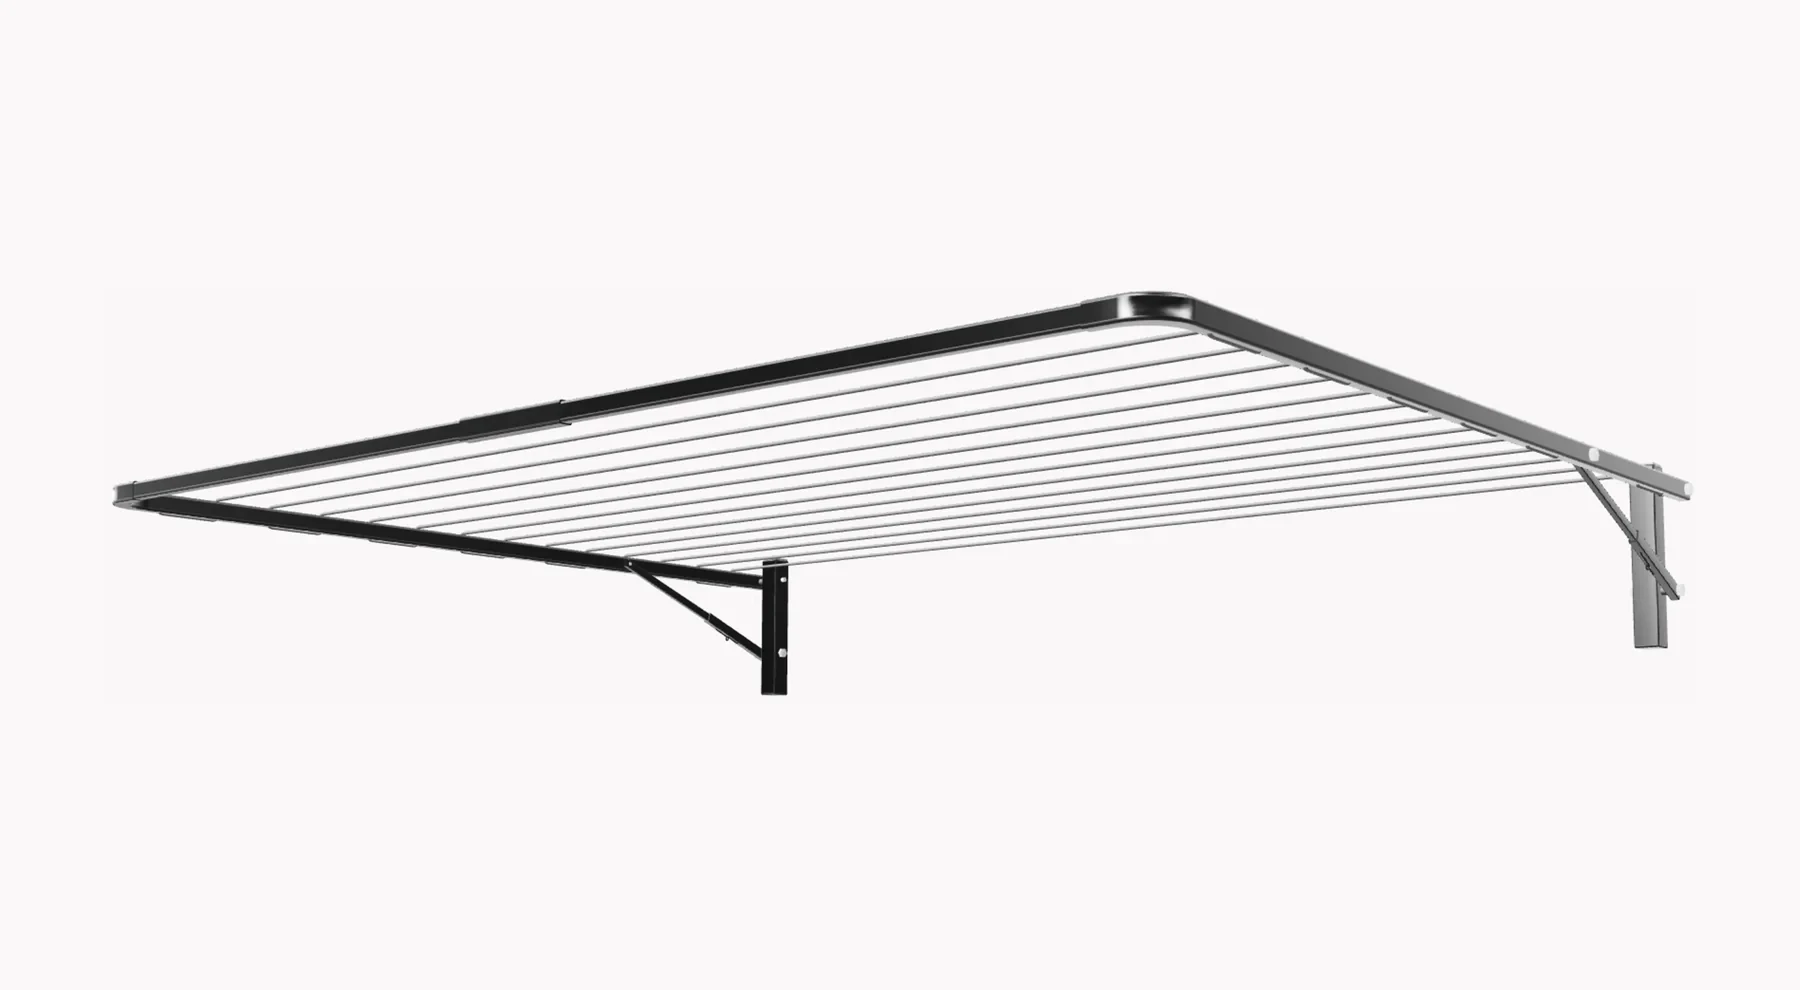 the best and most recommended fold down clothesline in australia: the ECO 300